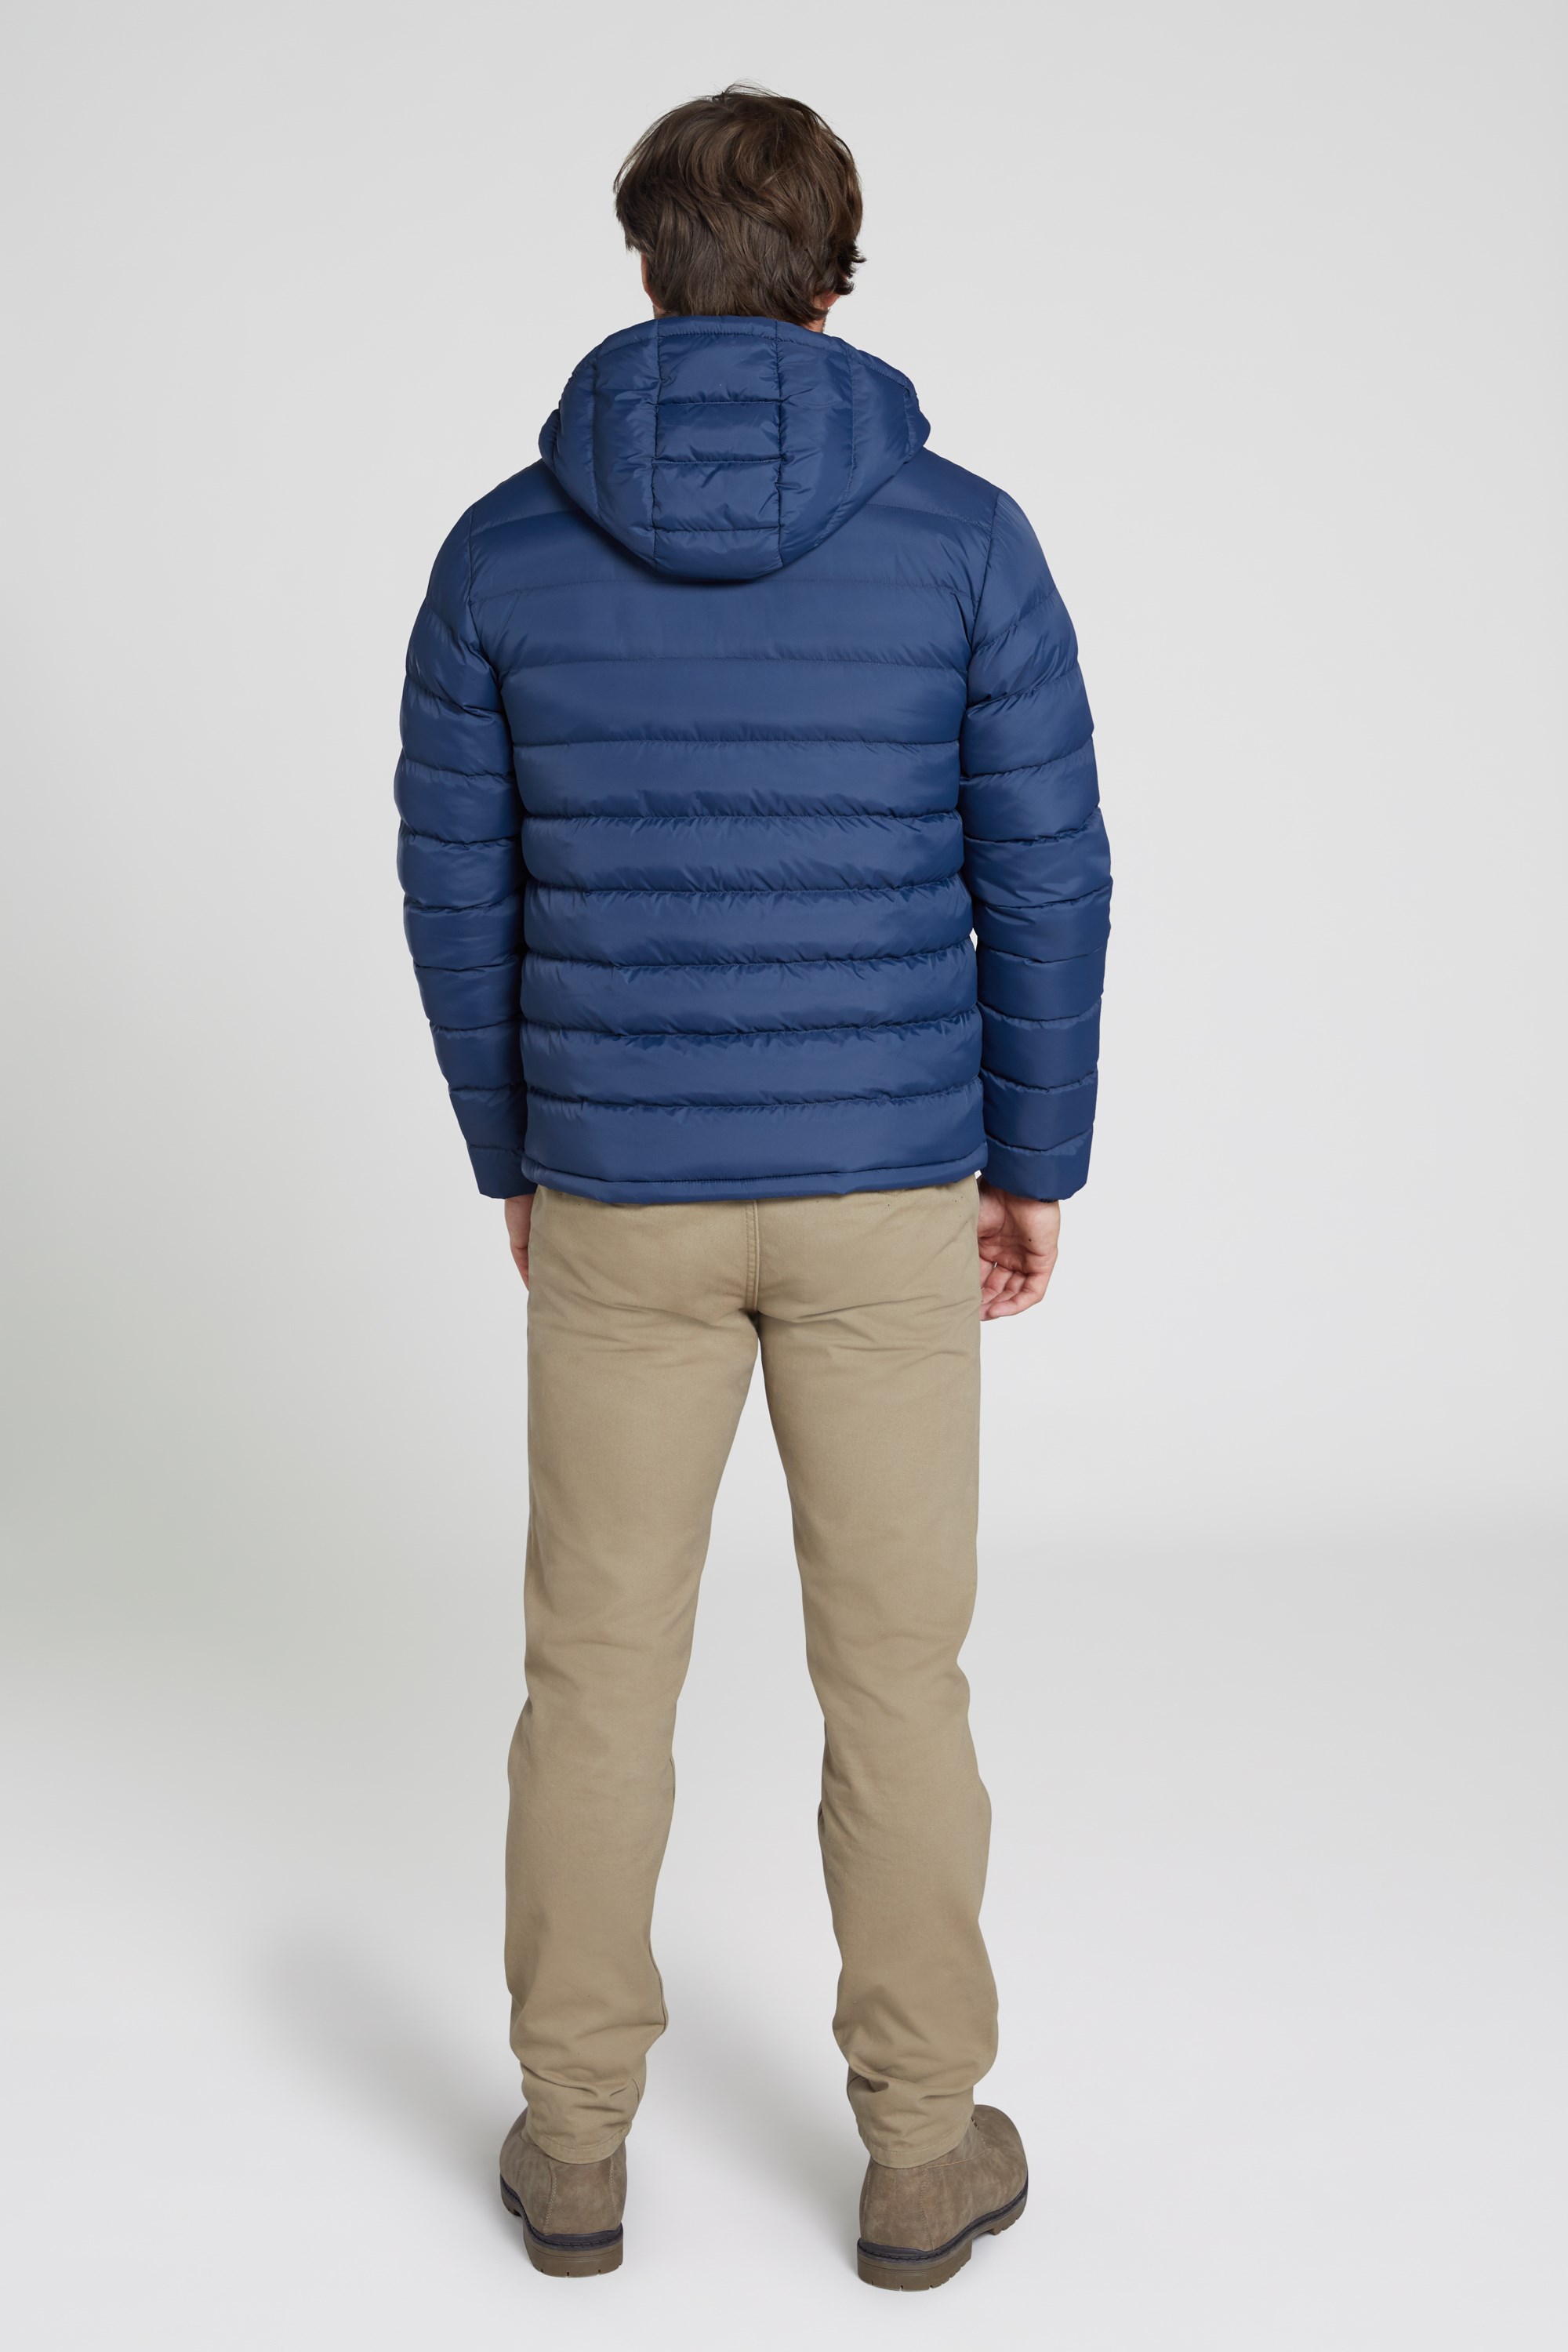 Men's Big and Tall Jackets | Mountain Warehouse GB